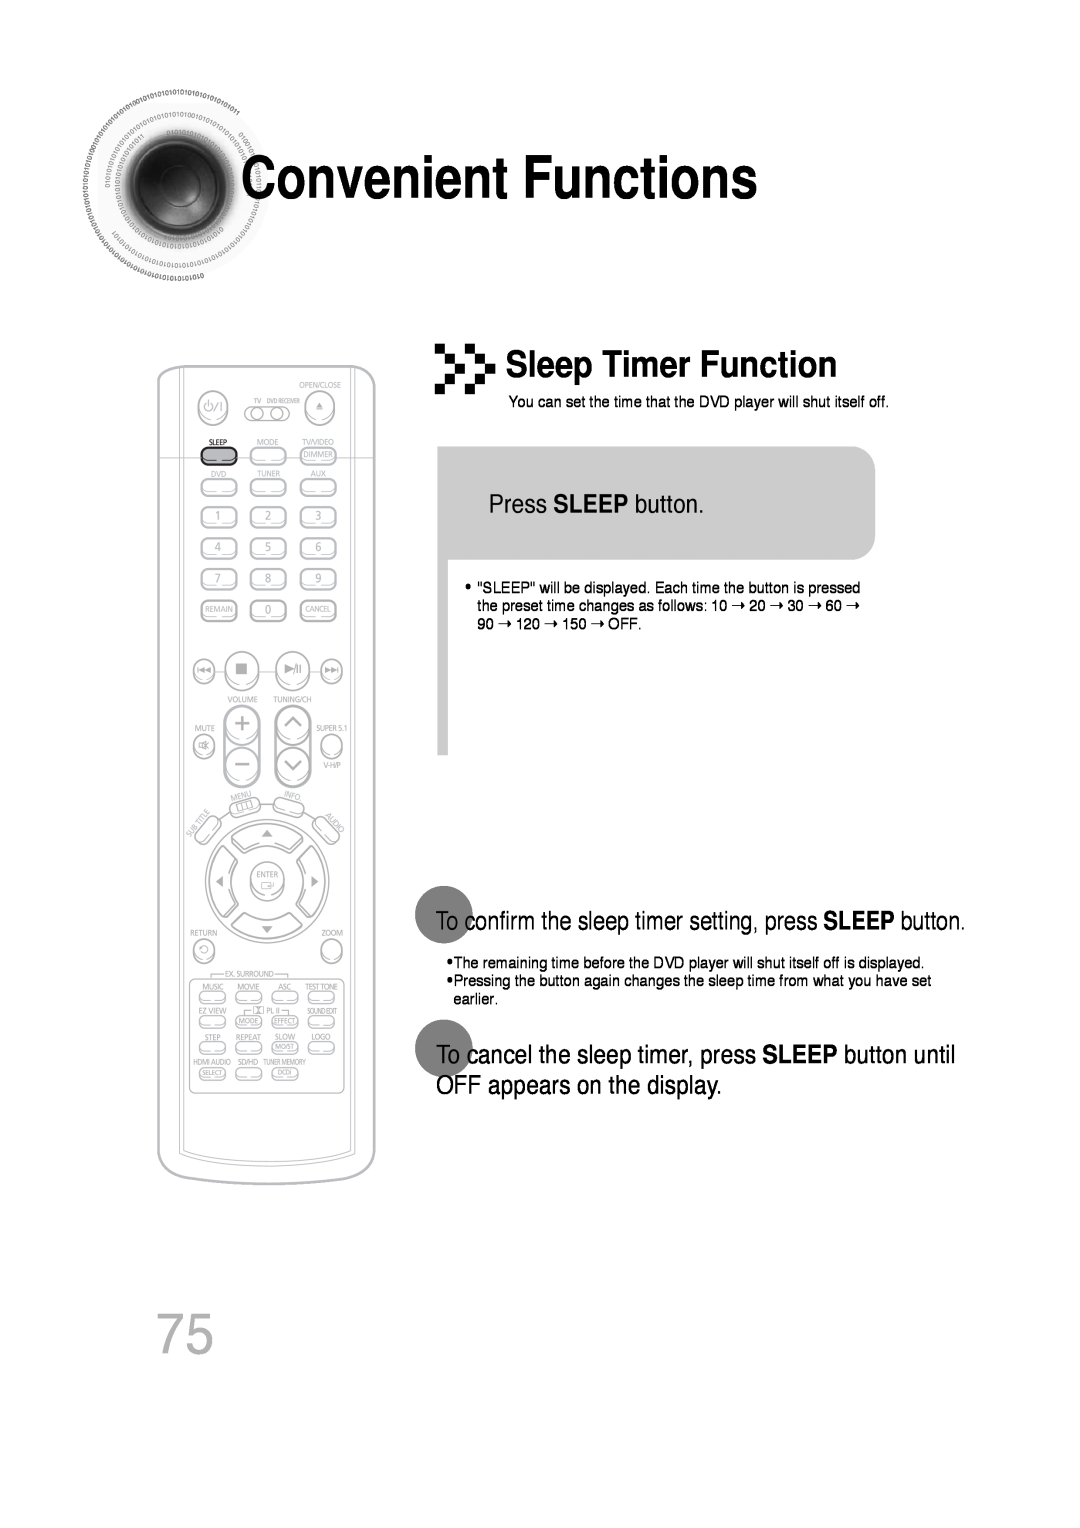 Samsung P1200-SECA, SDSM-EX manual ConvenientFunctions, Sleep Timer Function, Press SLEEP button, OFF appears on the display 